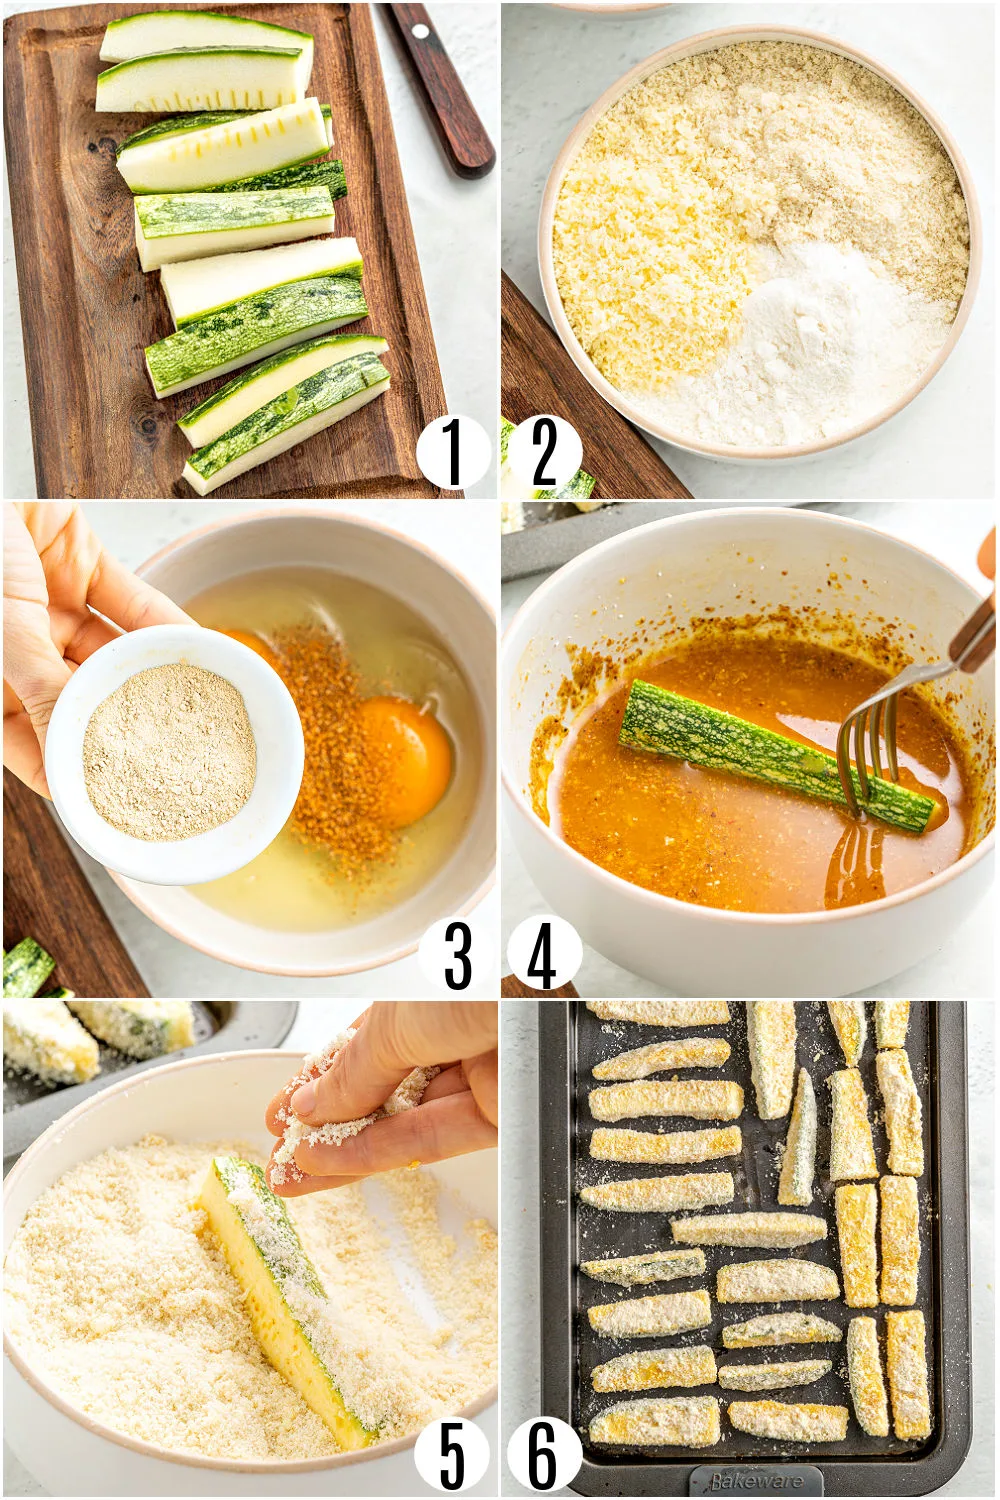 Step by step photos showing how to make zucchini fries.